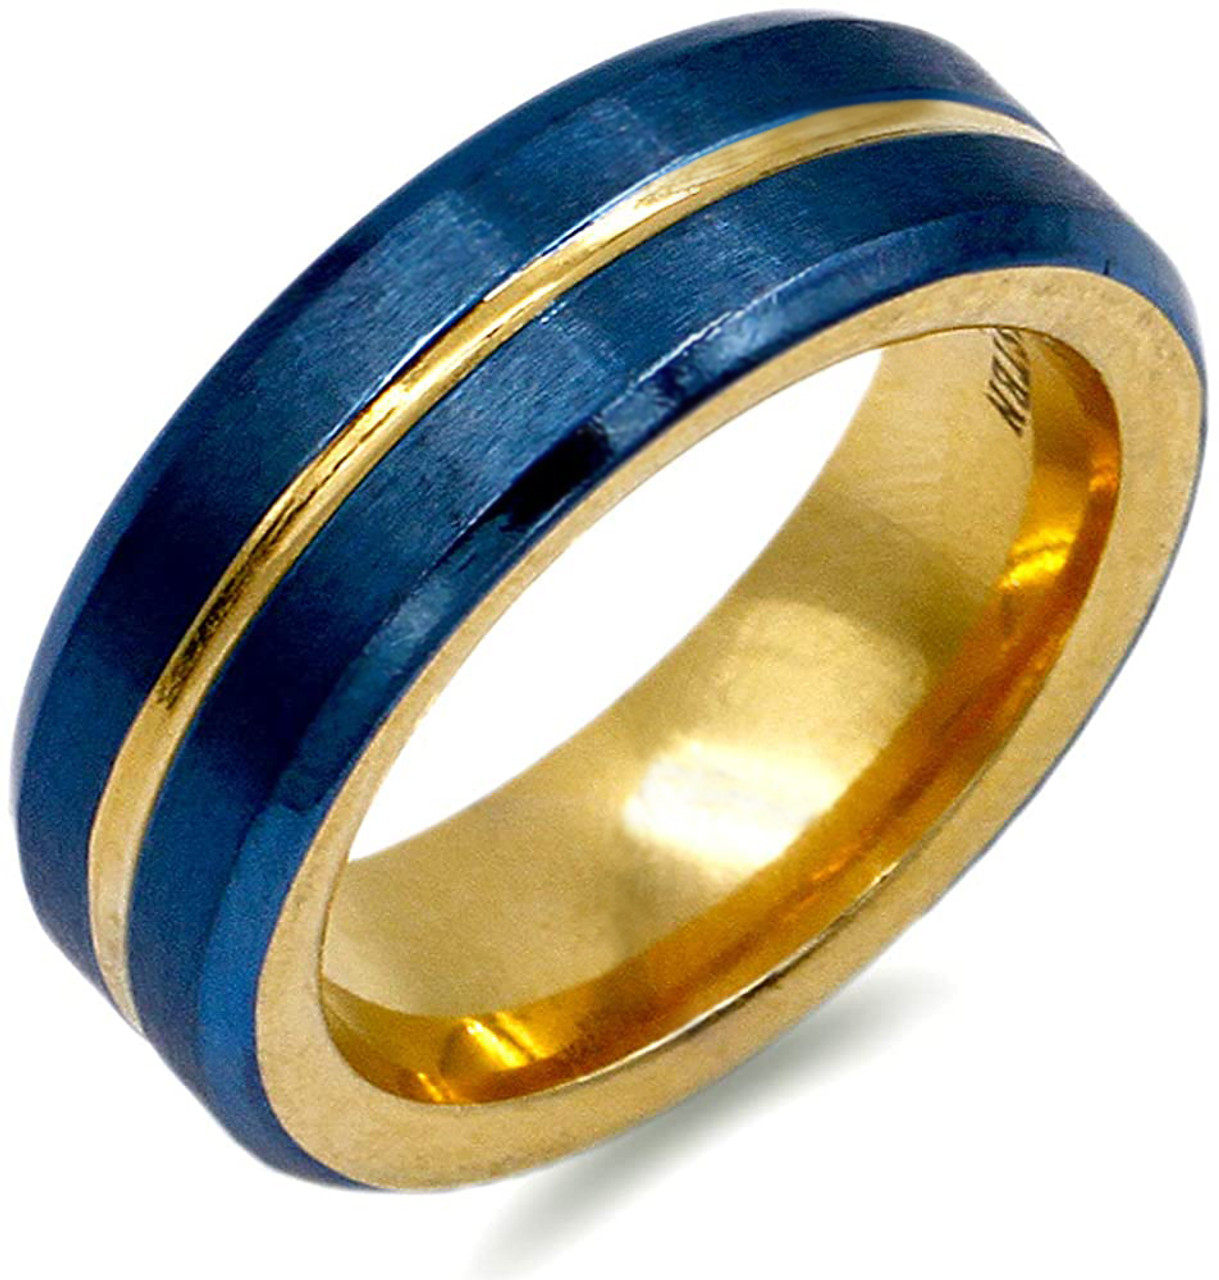 (8mm) Unisex or Men's Steel Wedding Ring Band. Matte Finish Blue Band with Yellow Gold Groove. High Polish Inside Gold Tone.